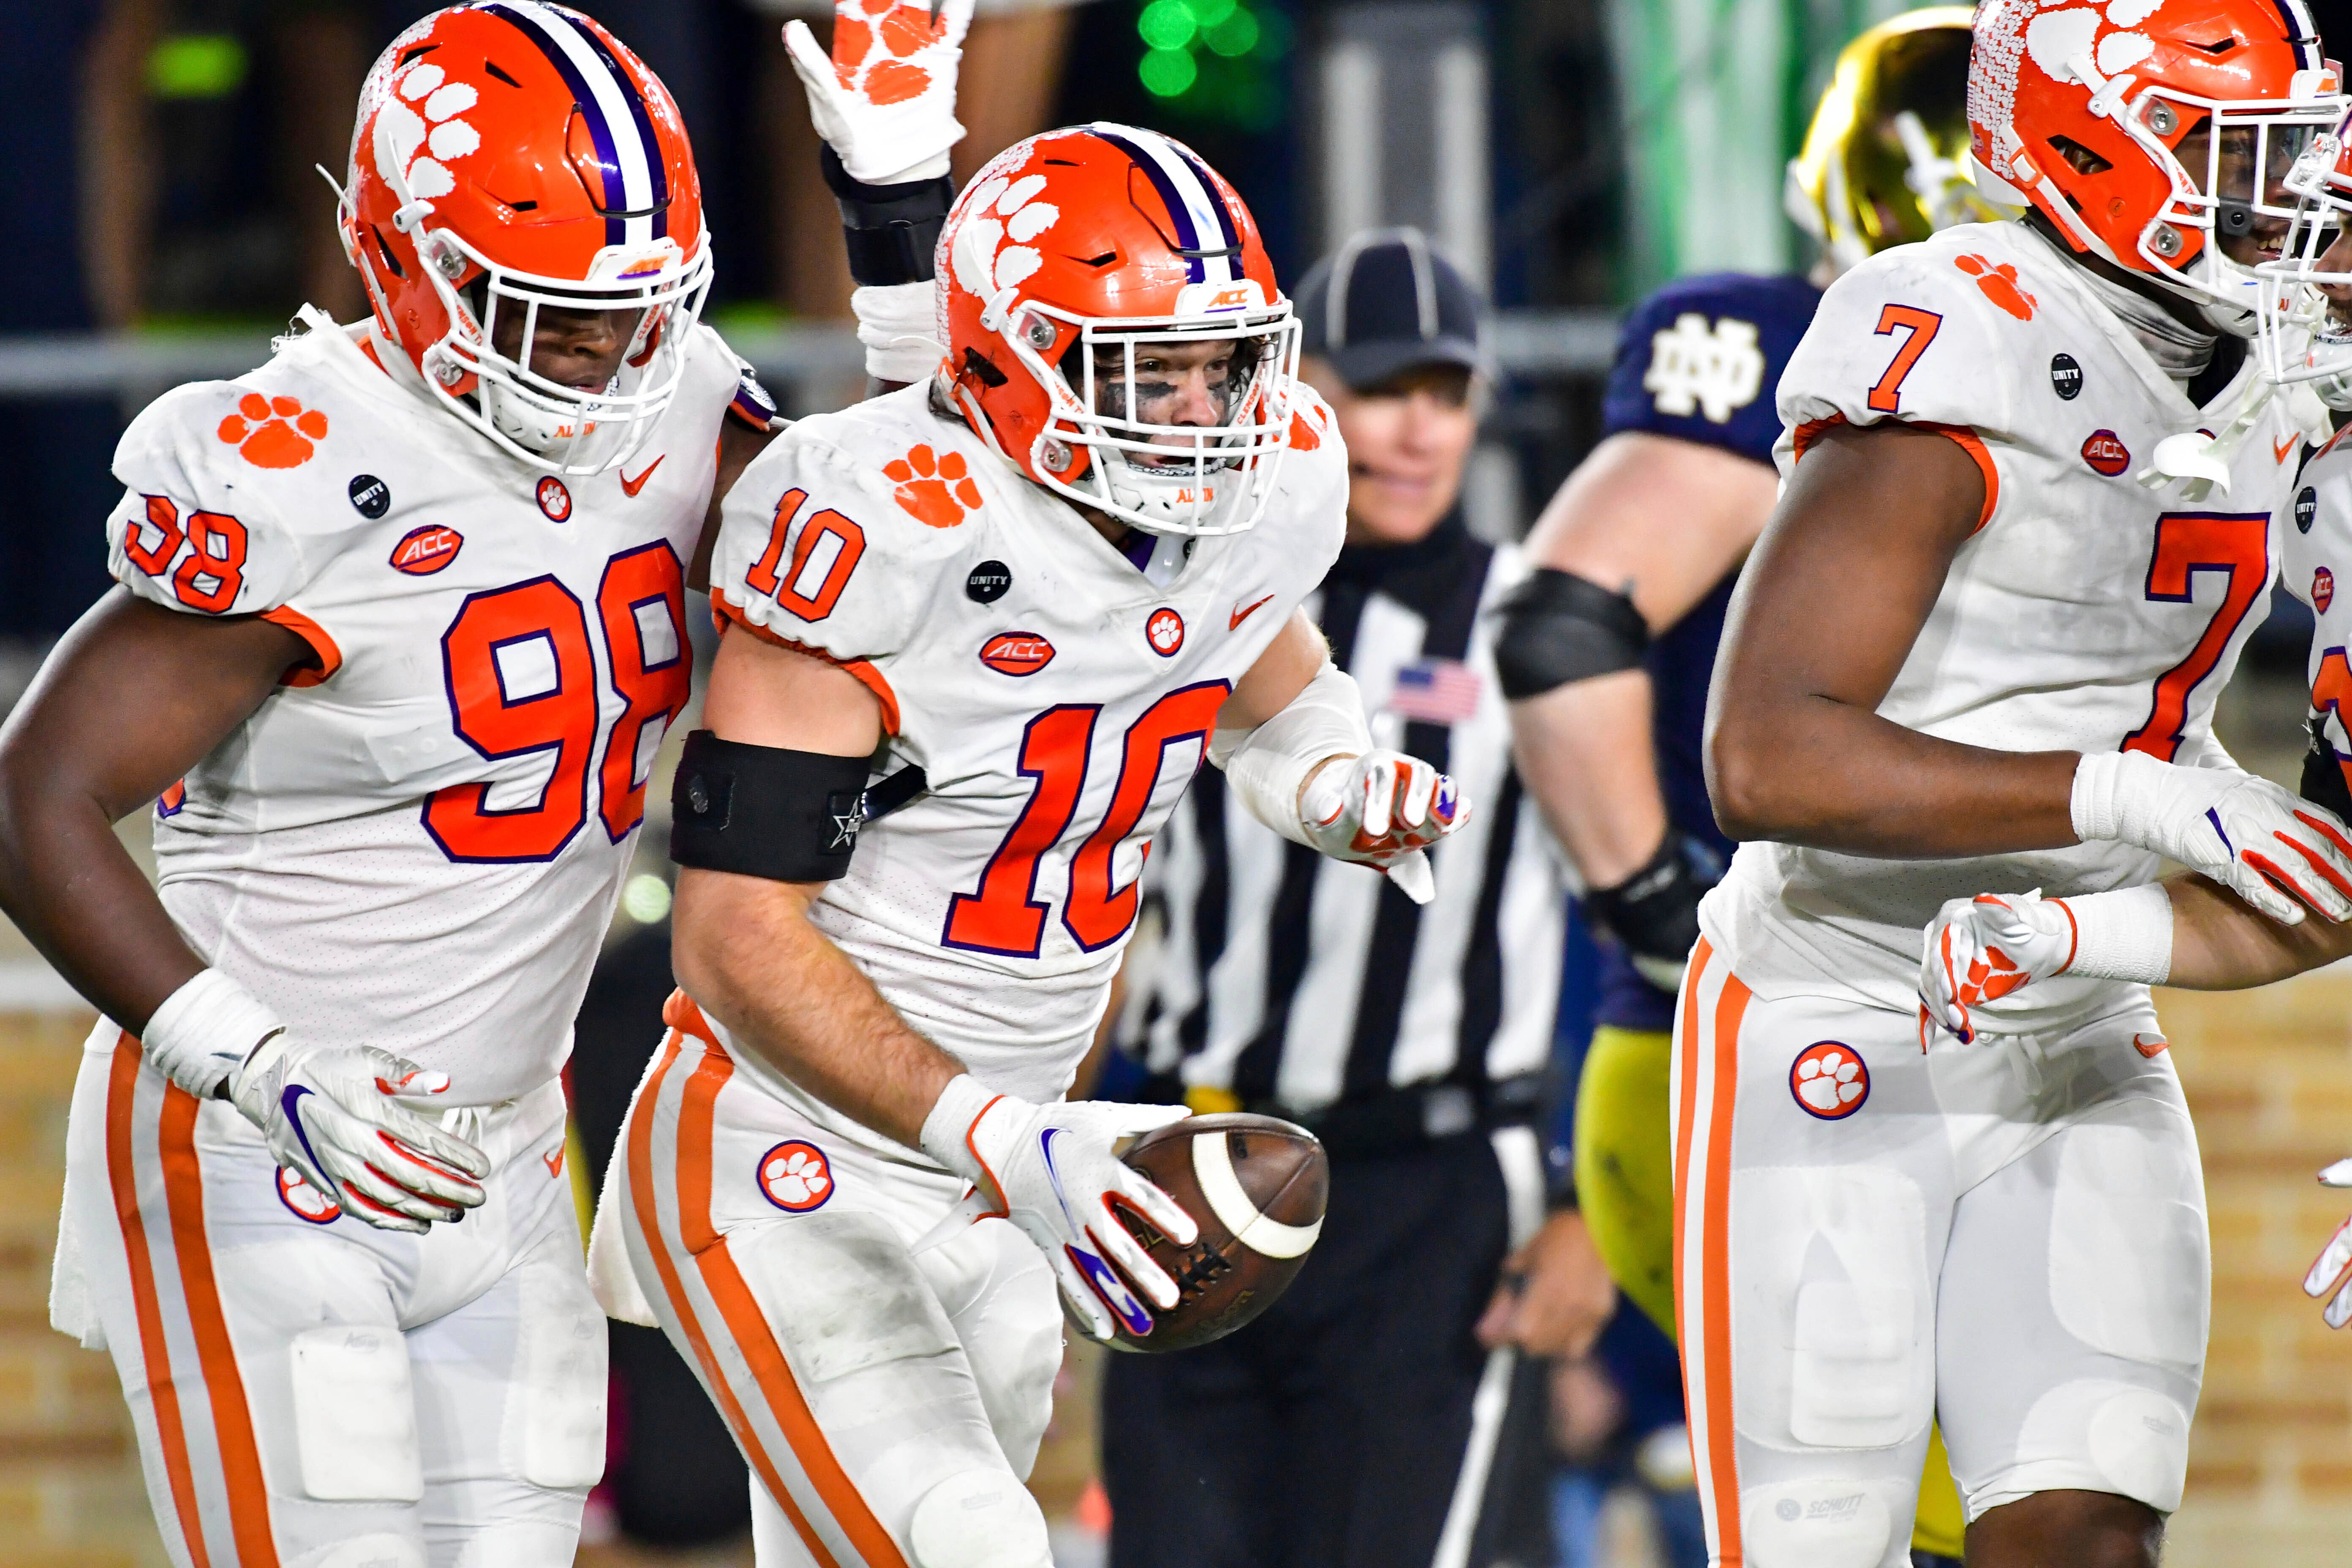 Clemson football vs. Notre Dame Scoring, photos from the game